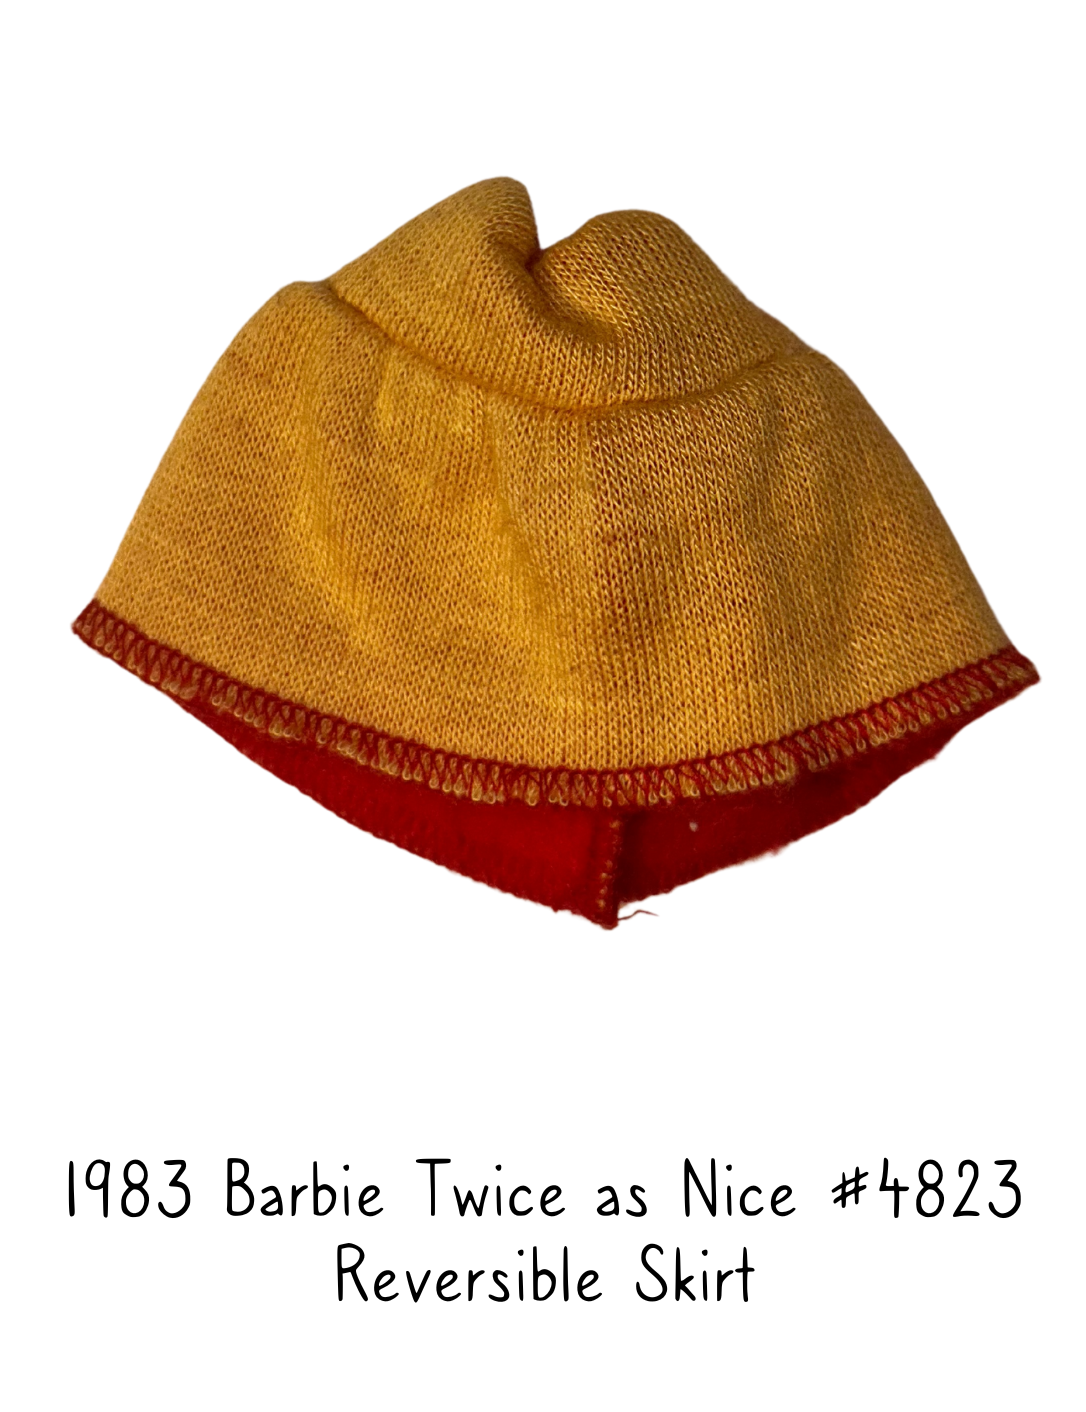 1983 Barbie Twice as Nice #4823 Reversible Yellow and Red Skirt